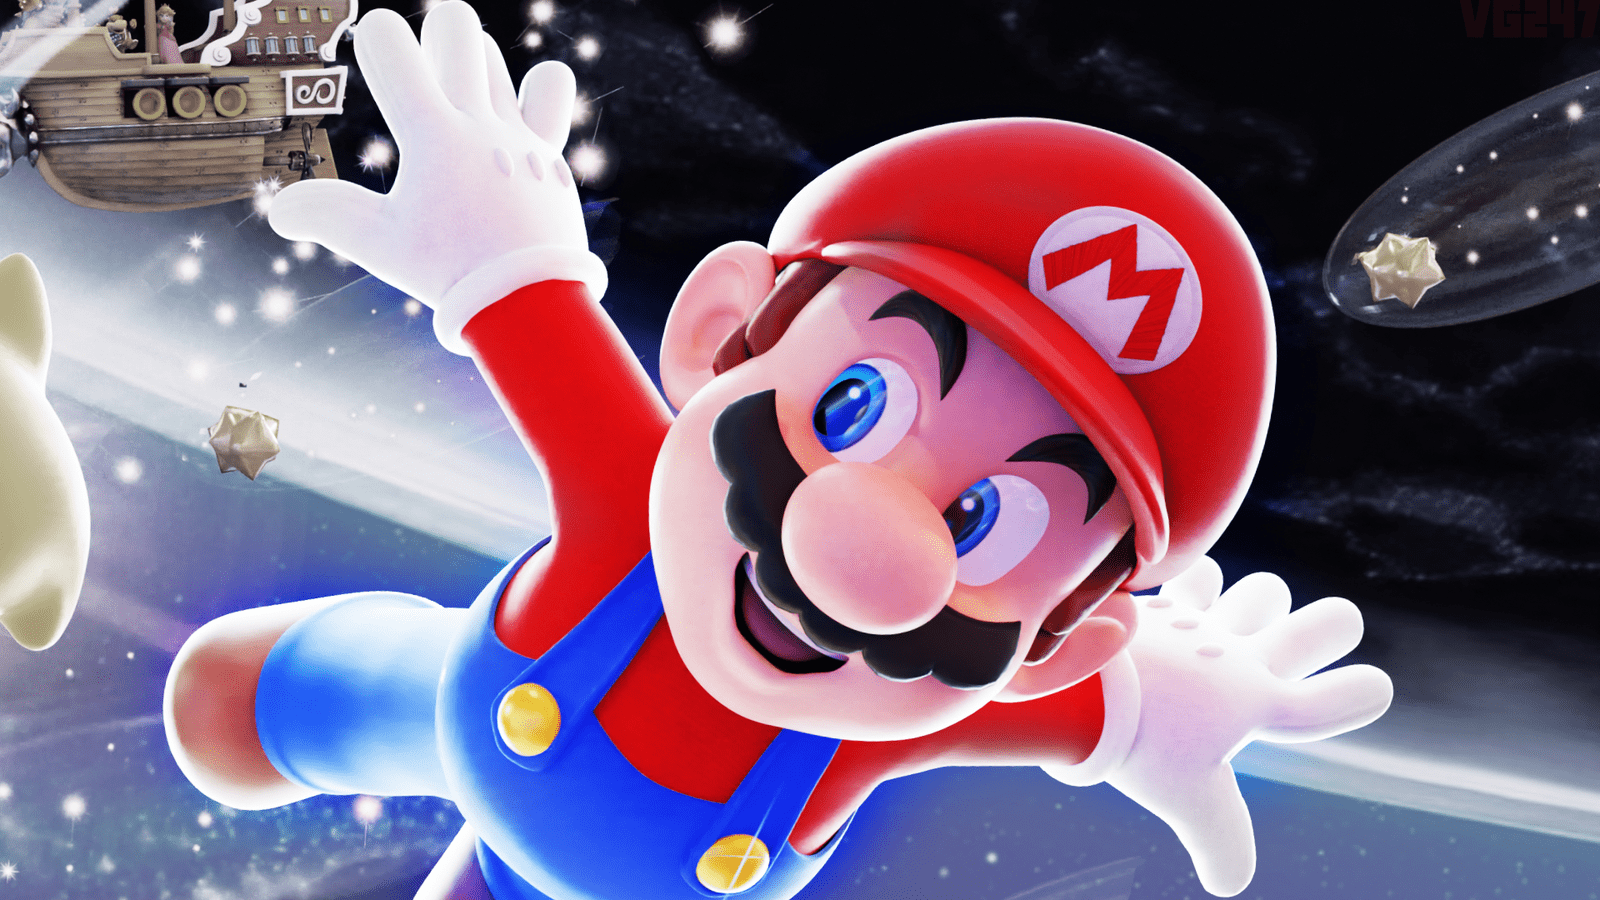 Mario in space, with a ship and stars in the background - Super Mario